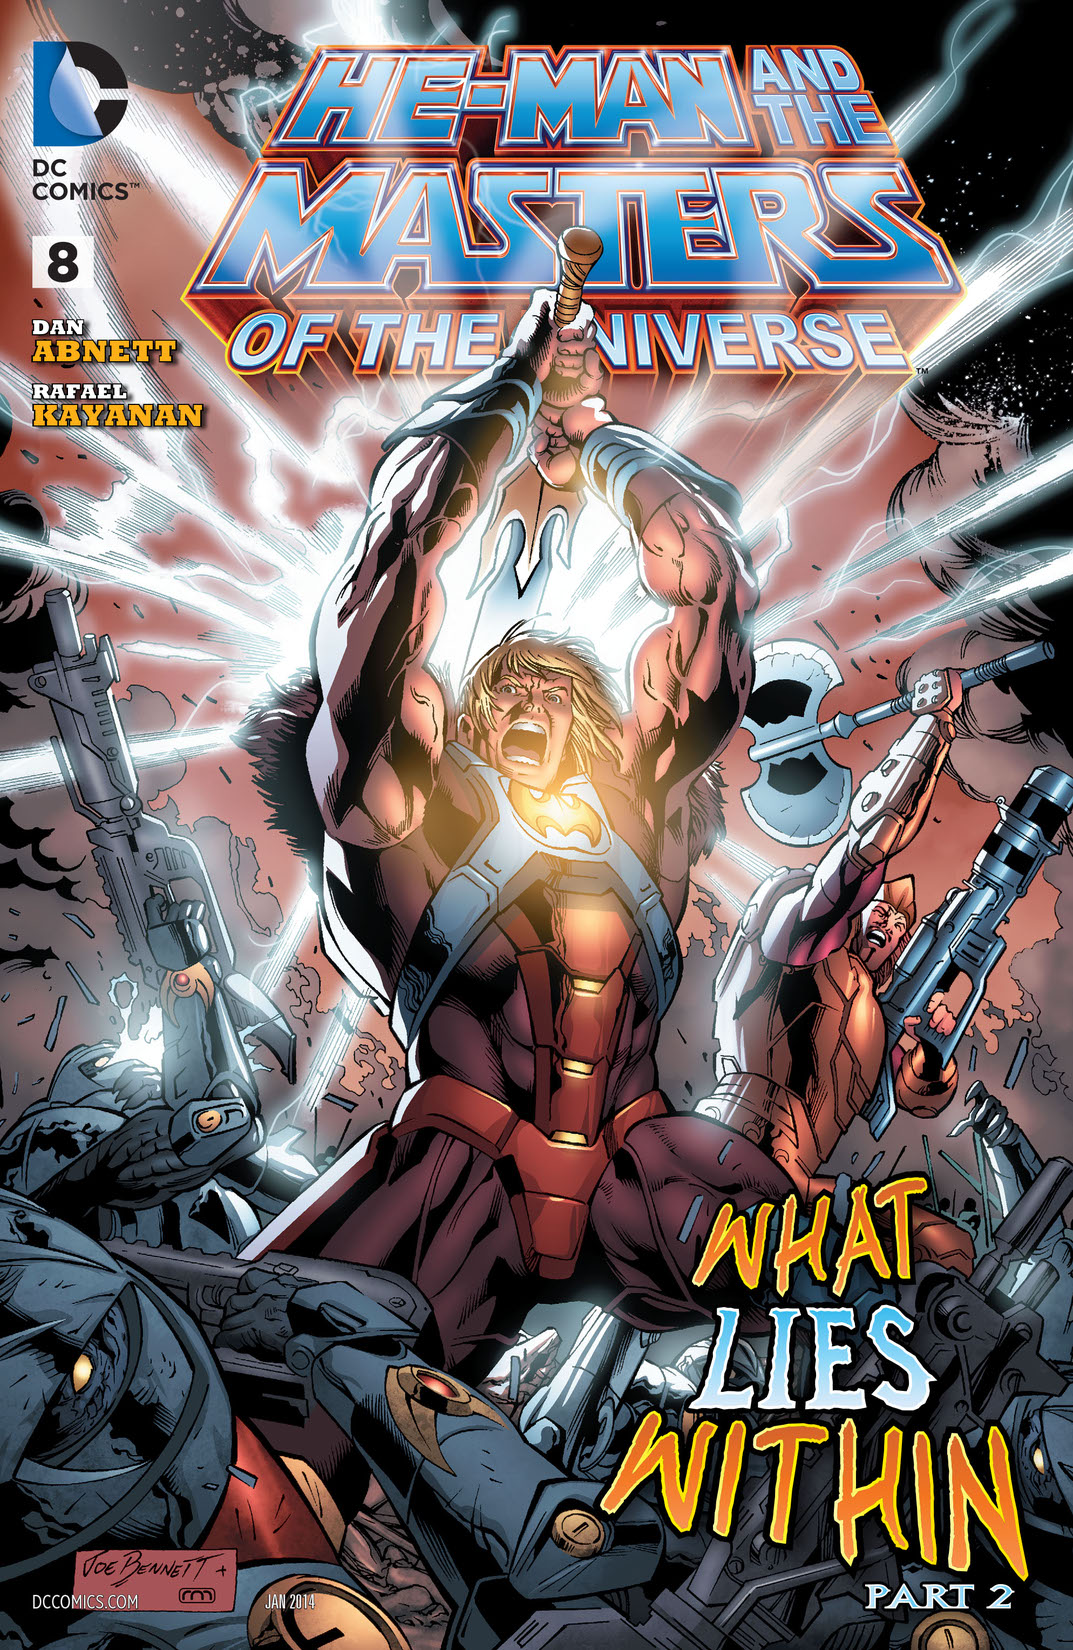 He-Man and the Masters of the Universe (2013-) #8 preview images